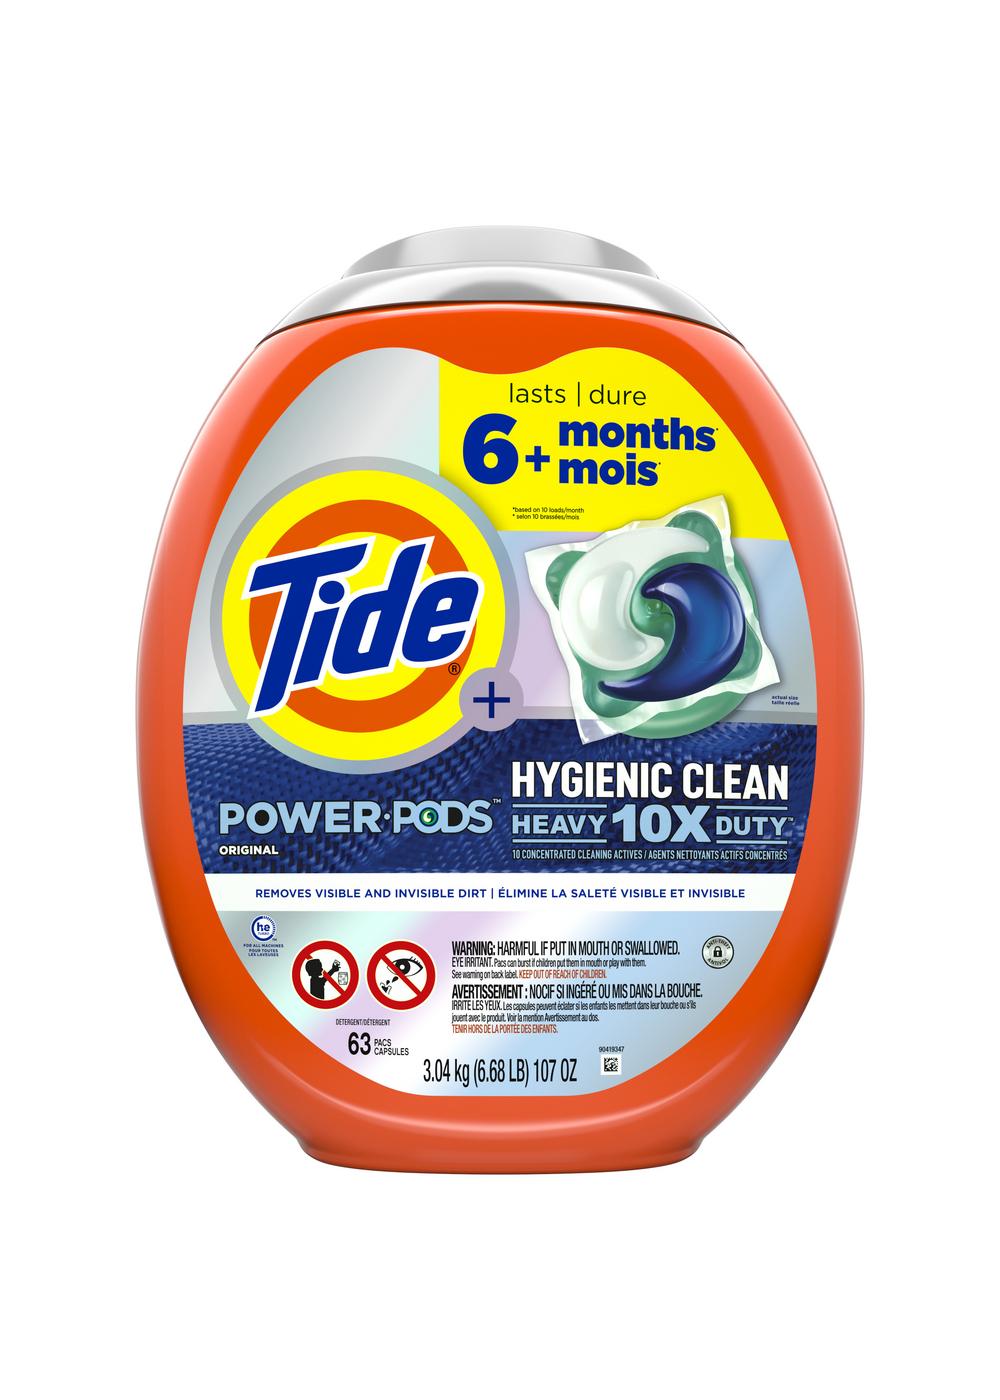 Tide Power PODS Hygienic Clean Original Scent HE Laundry Detergent Pacs; image 7 of 10